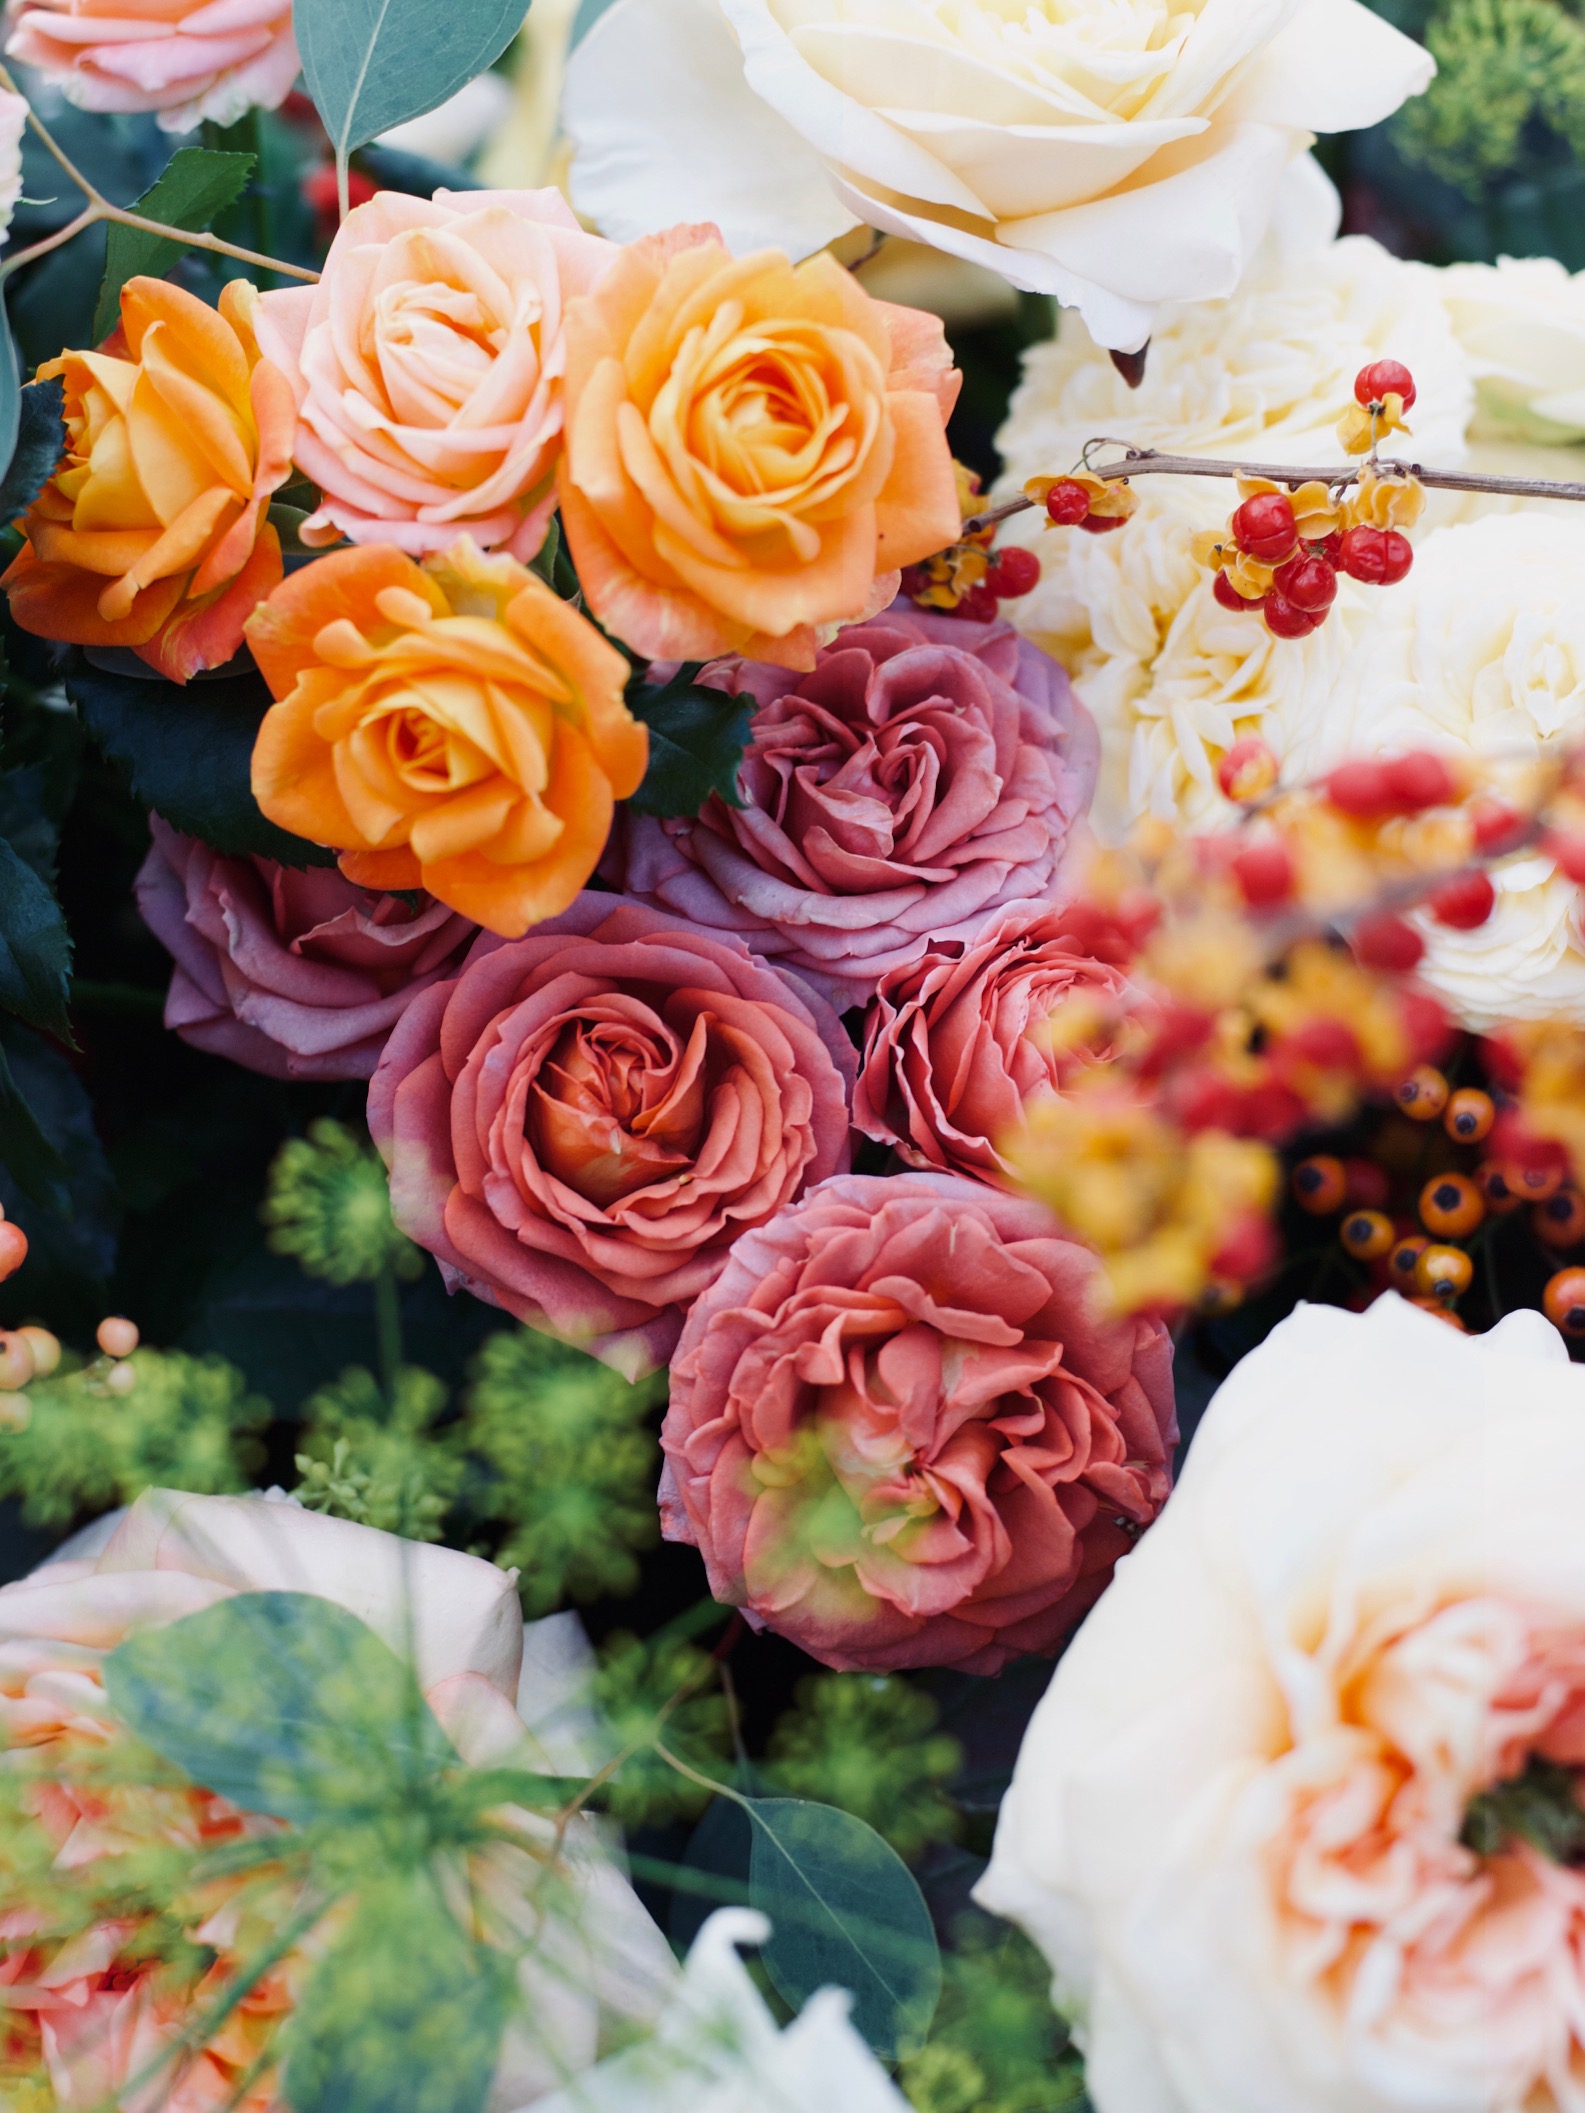 World’s most beautiful Roses in Autumn Bouquet by Katya Hutter